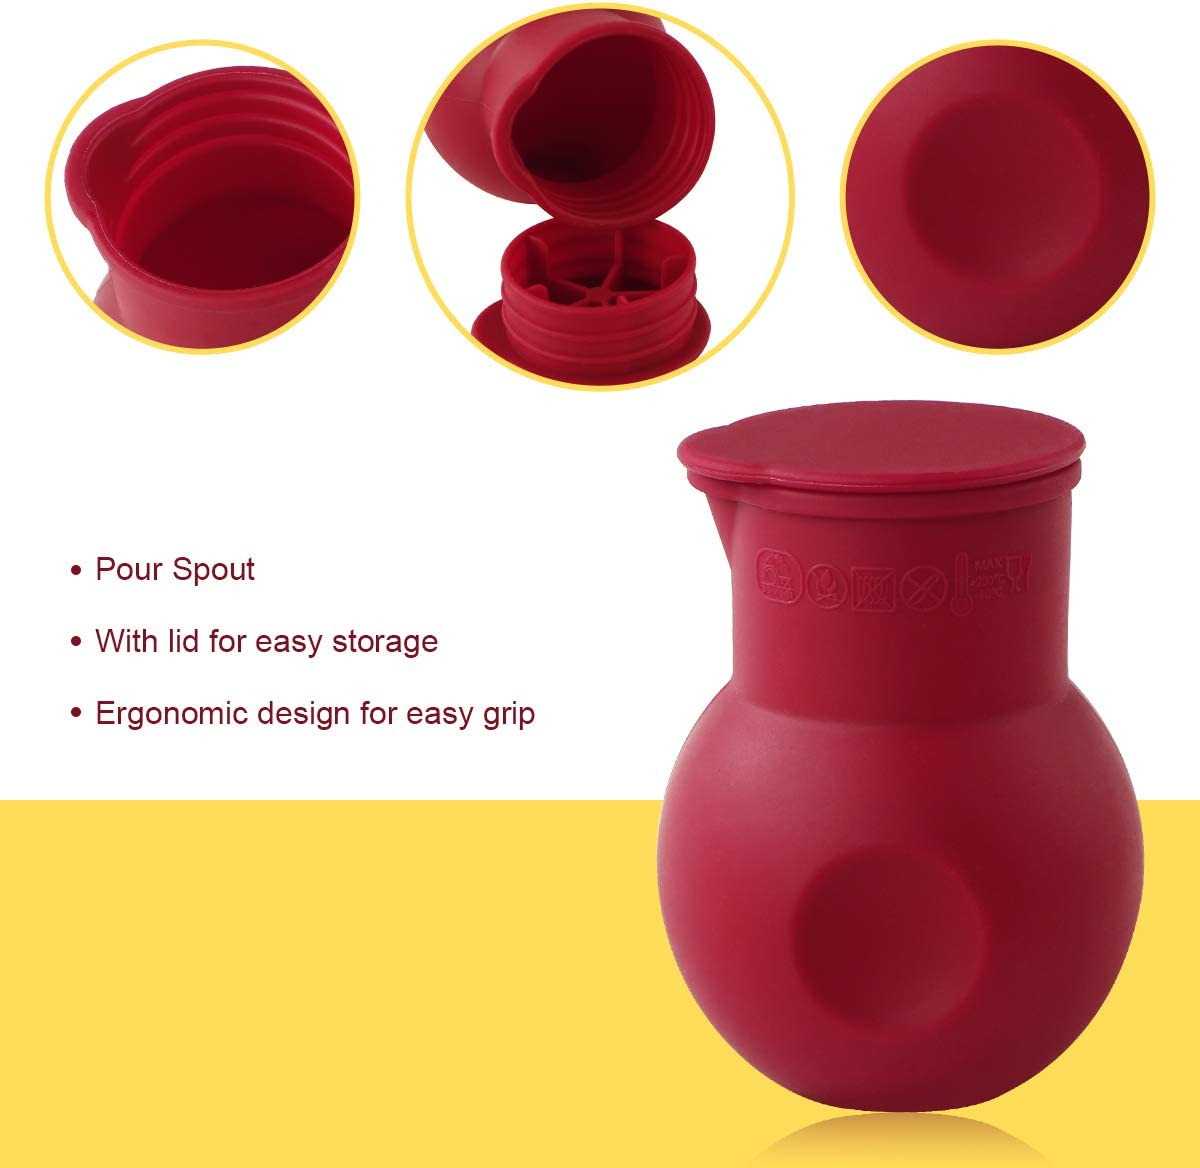 Webake silicone chocolate microwave melting pot pour candy butter warmer,Set of 2